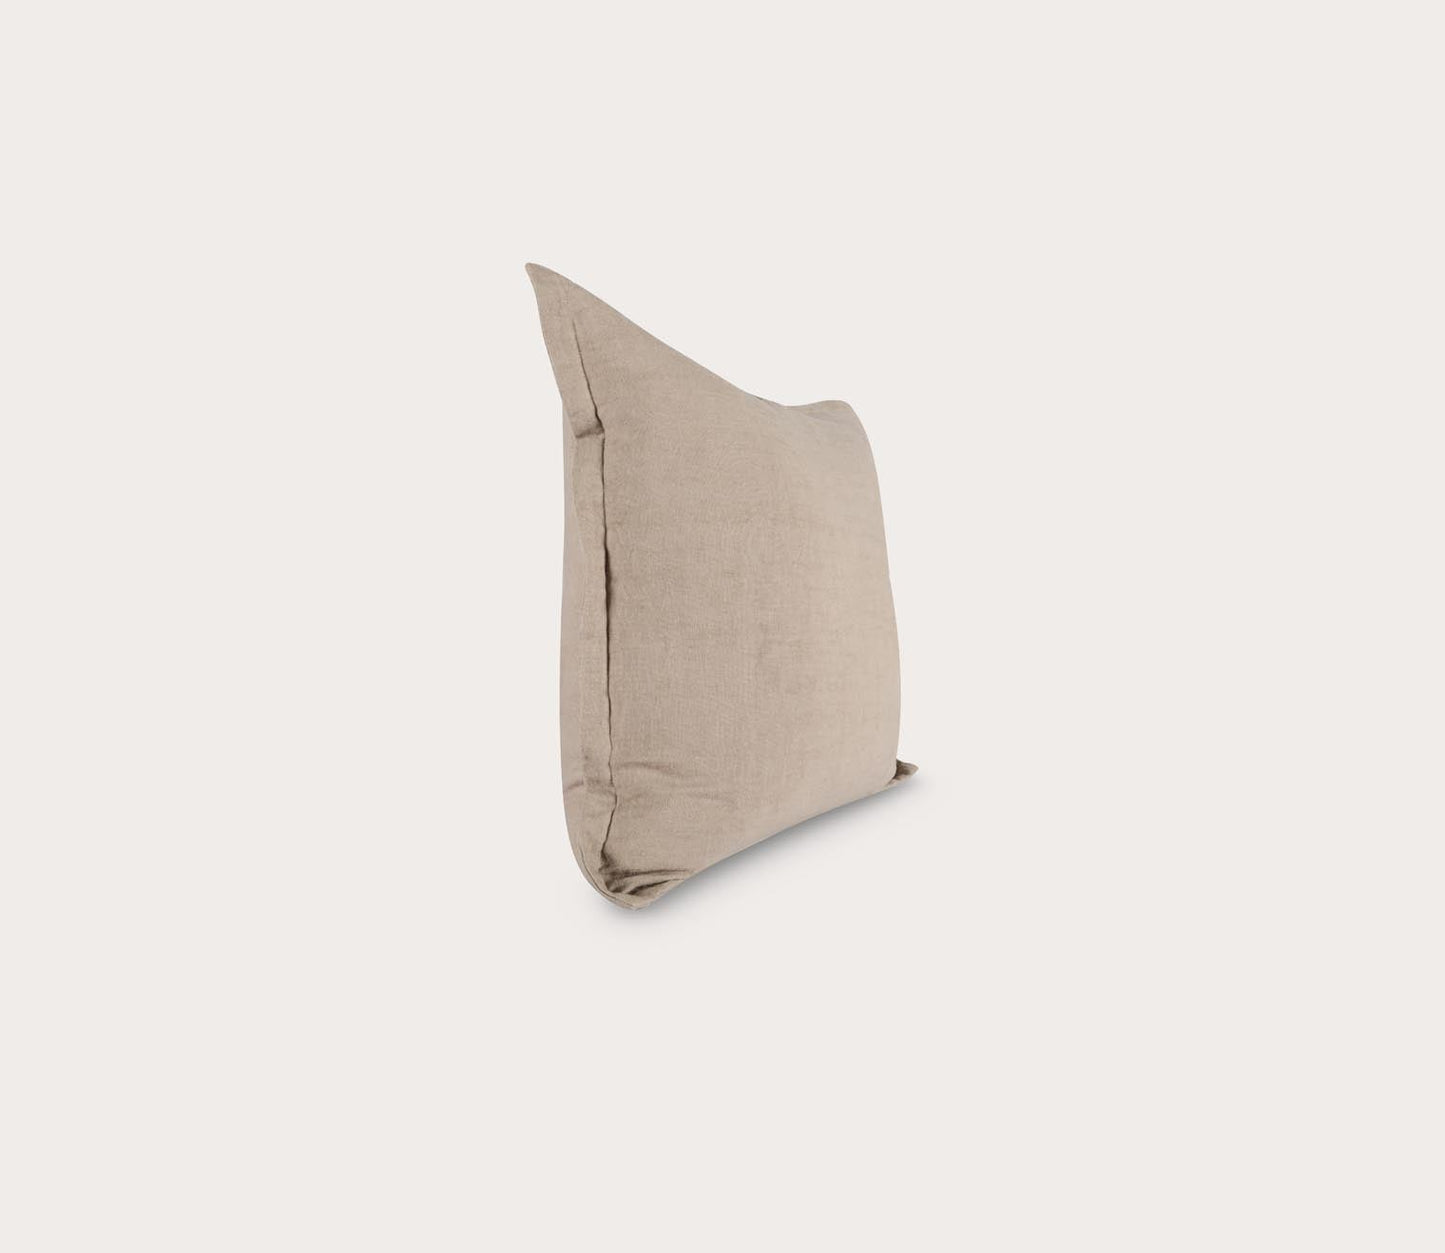 Solstice Flax Linen Throw Pillow by Villa by Classic Home